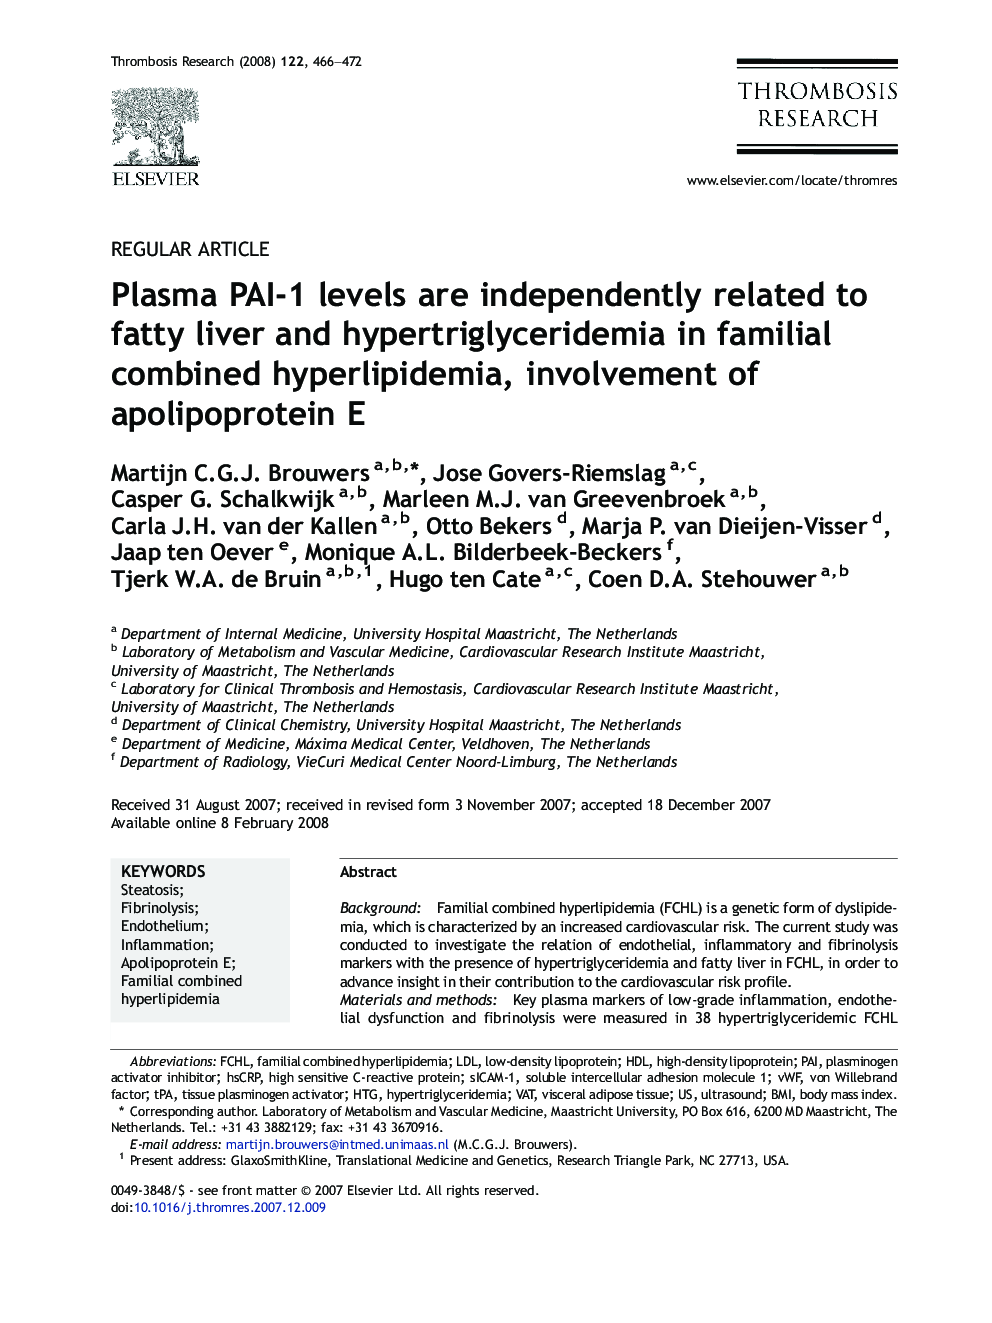 Plasma PAI-1 levels are independently related to fatty liver and hypertriglyceridemia in familial combined hyperlipidemia, involvement of apolipoprotein E